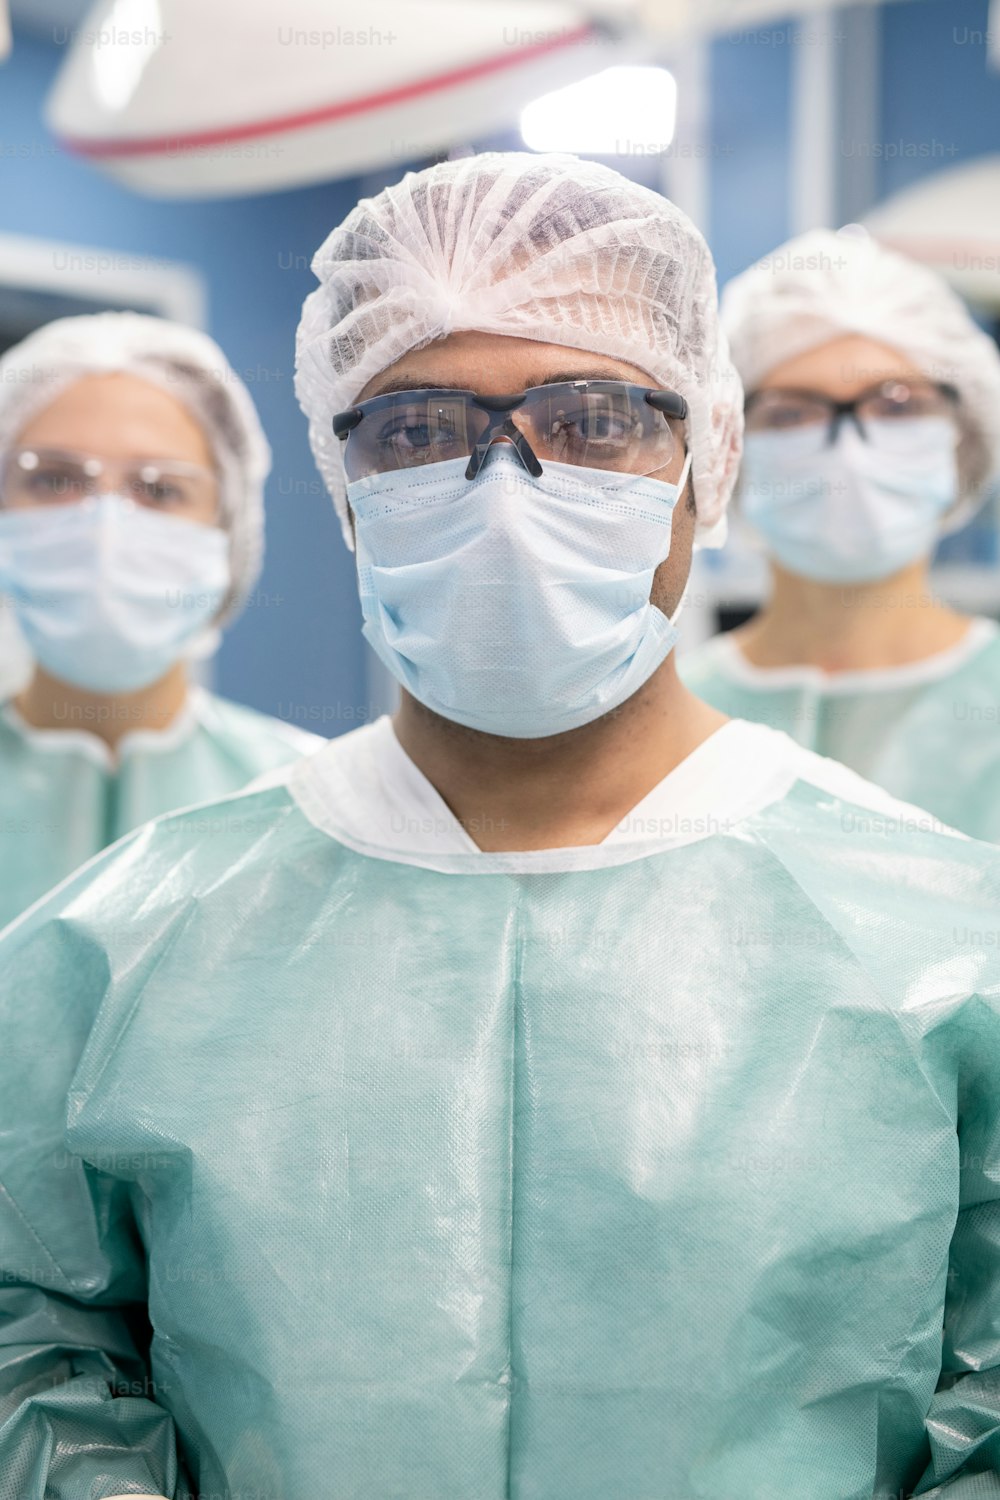 Young professional male surgeon and his two assistants in protective uniform, mask and eyeglasses standing in operating room